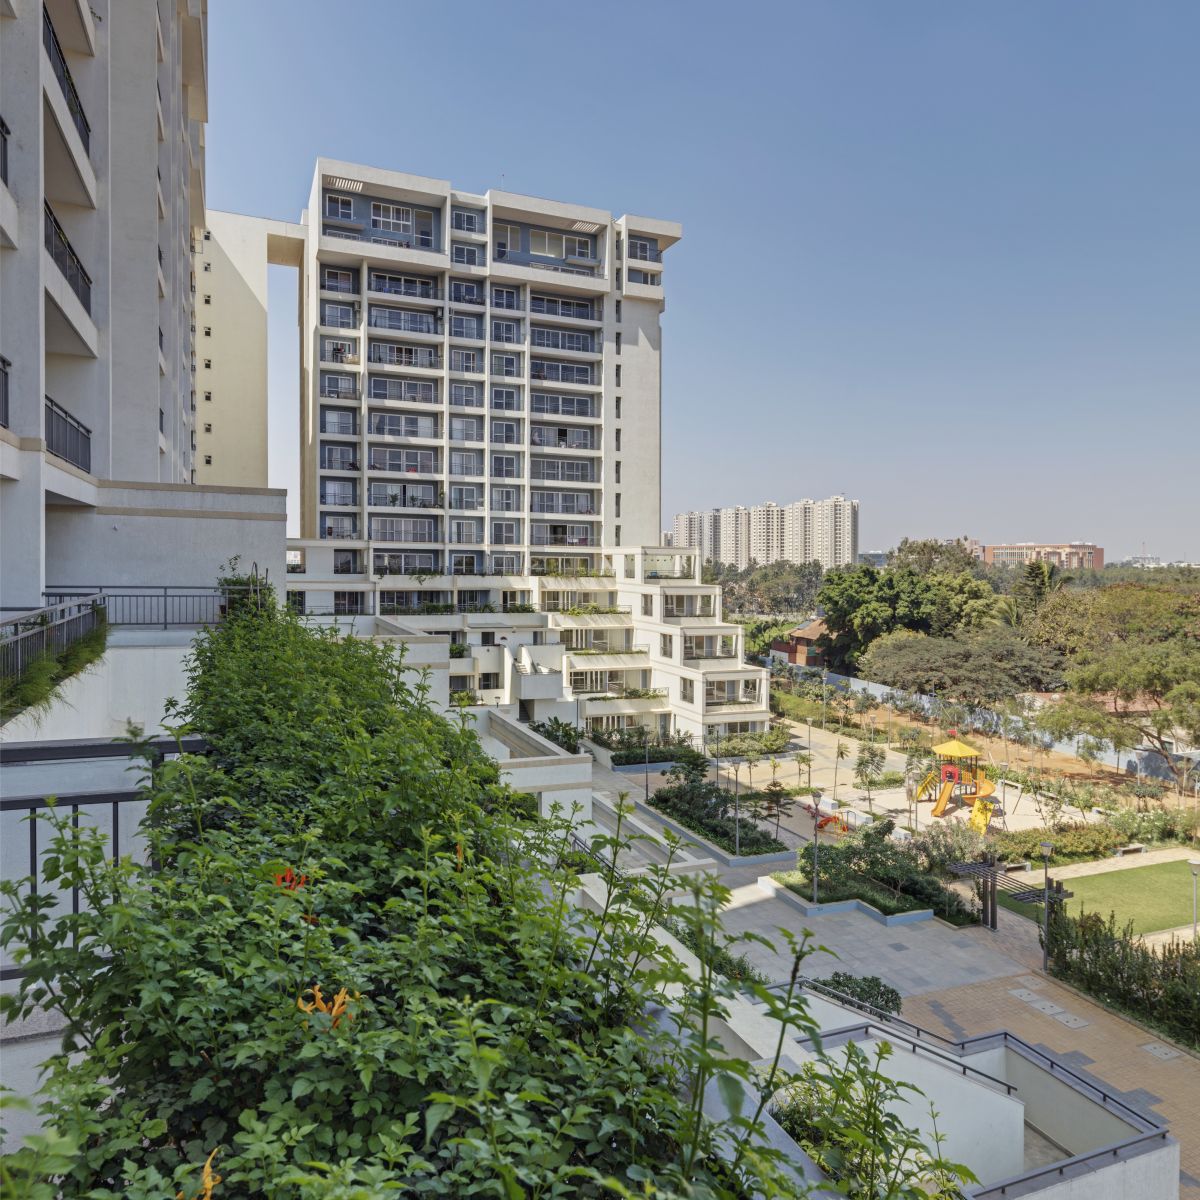 Terraced Residential Highrise, at Nallurhalli Road, Siddhapura, Bangalore, by CnT Architects 10